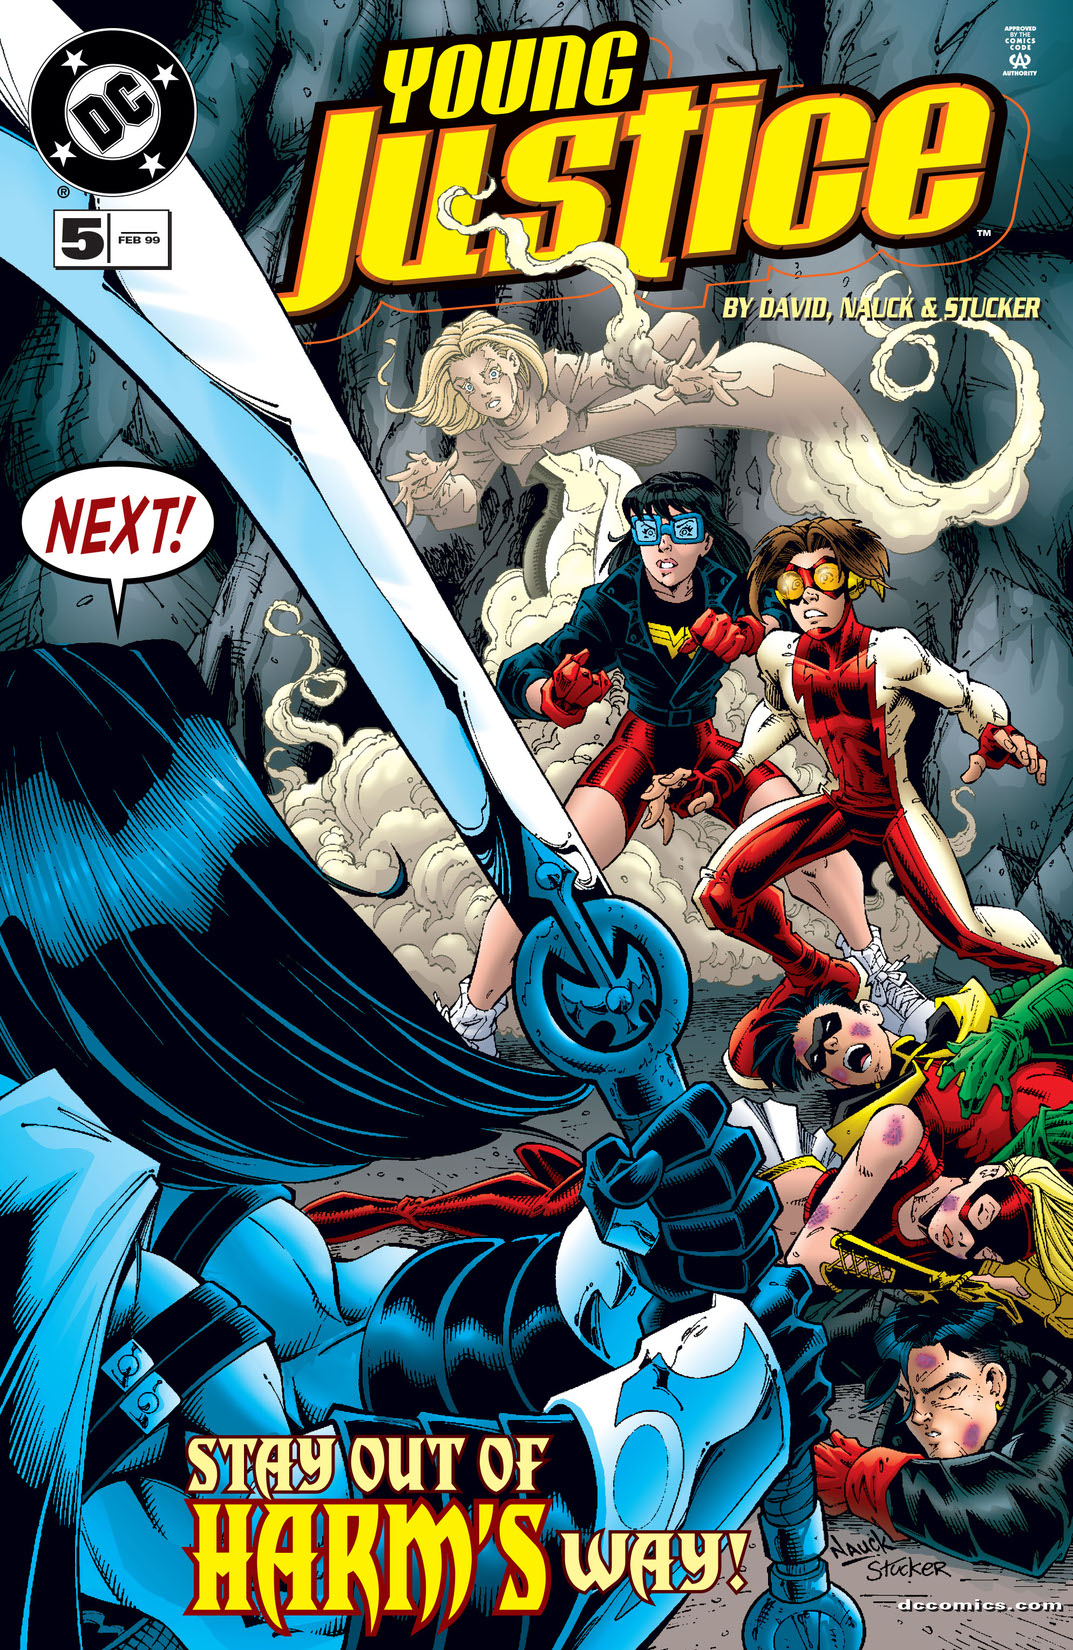 Young Justice (1998-) #5 preview images